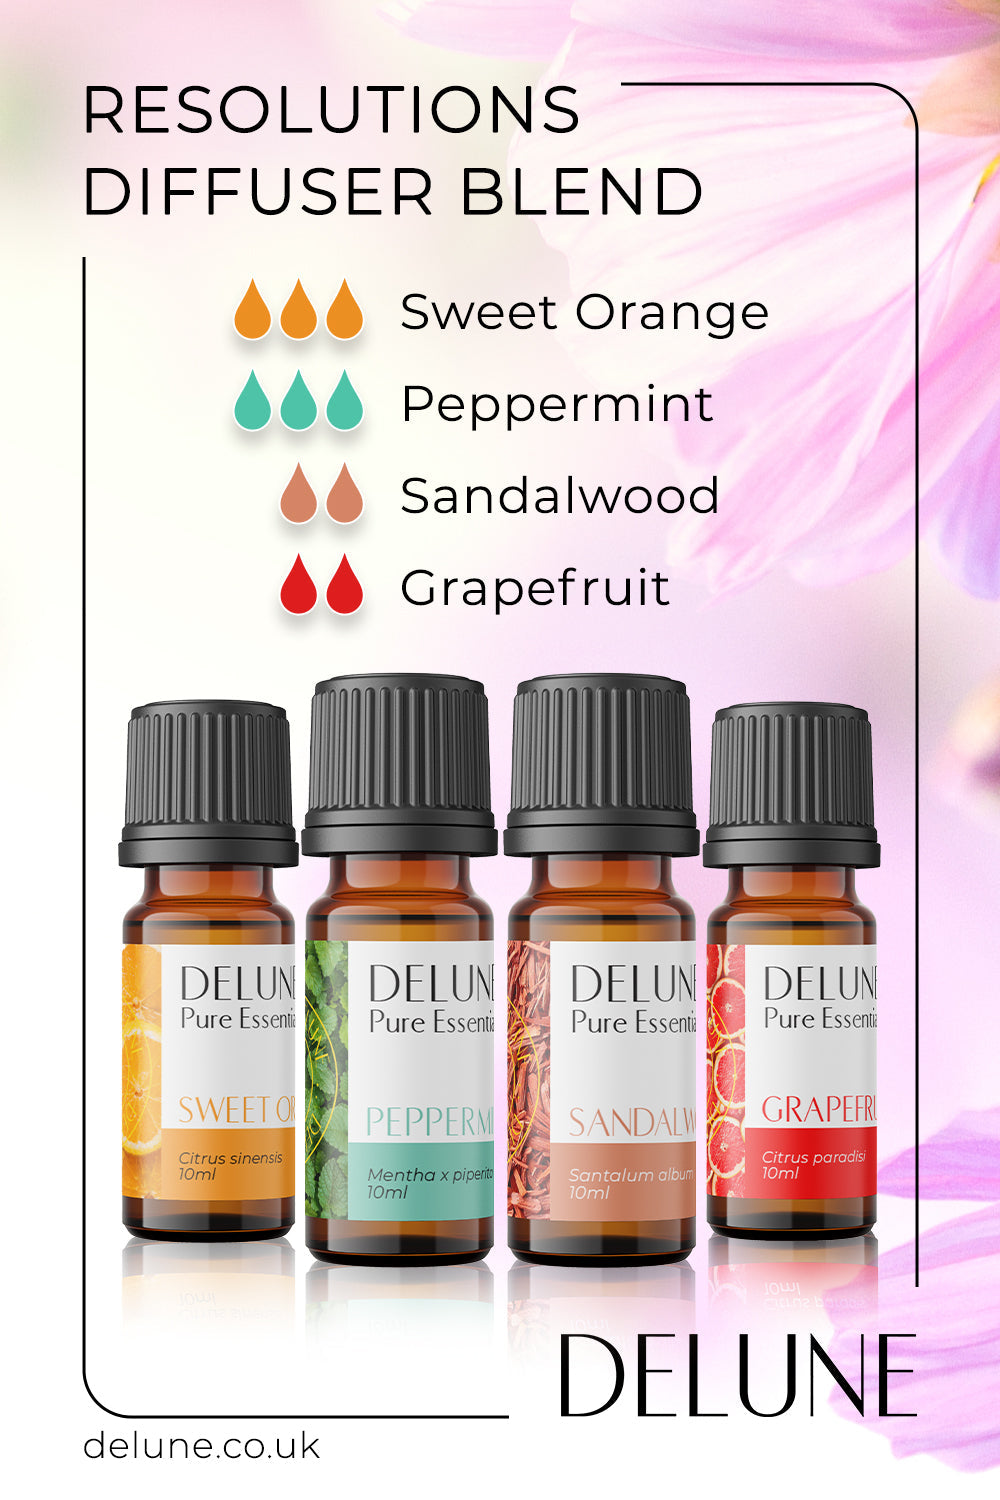 Resolutions - Diffuser Blend